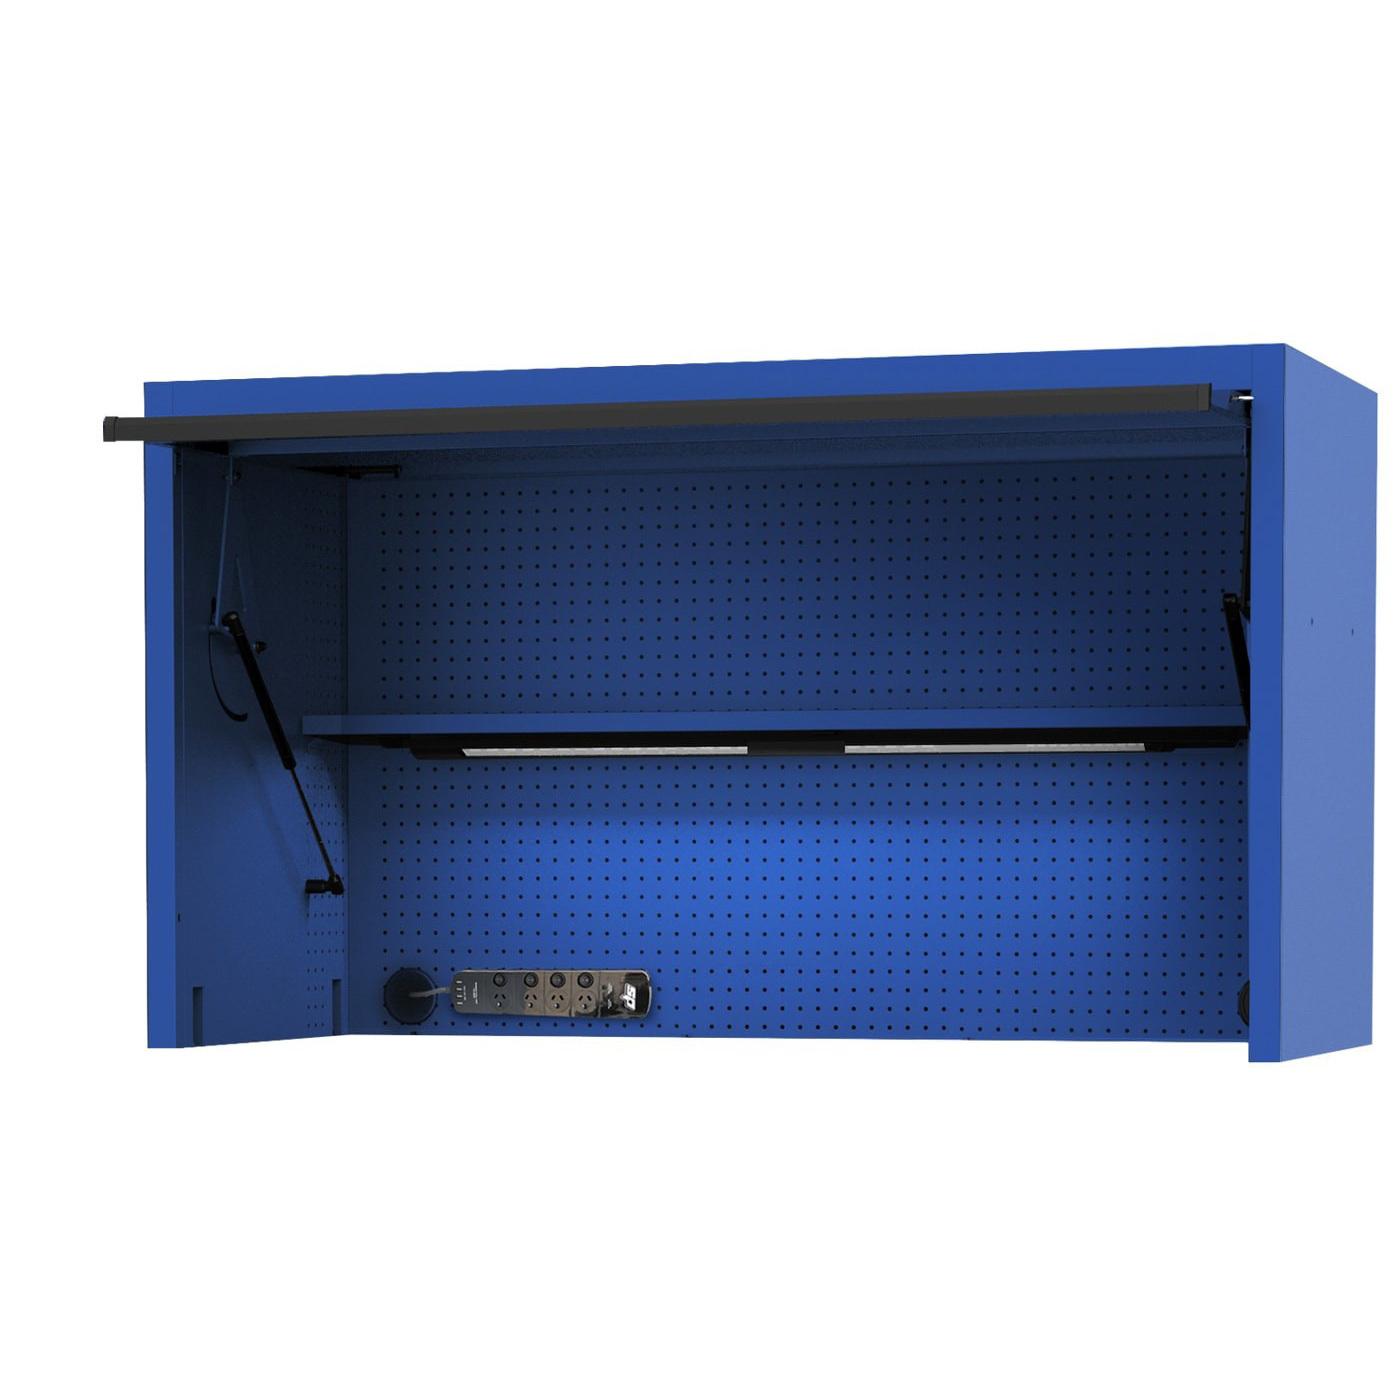 SP Tools 59" USA Sumo Series Wide Power Top Hutch - Blue/Black SP44730BL